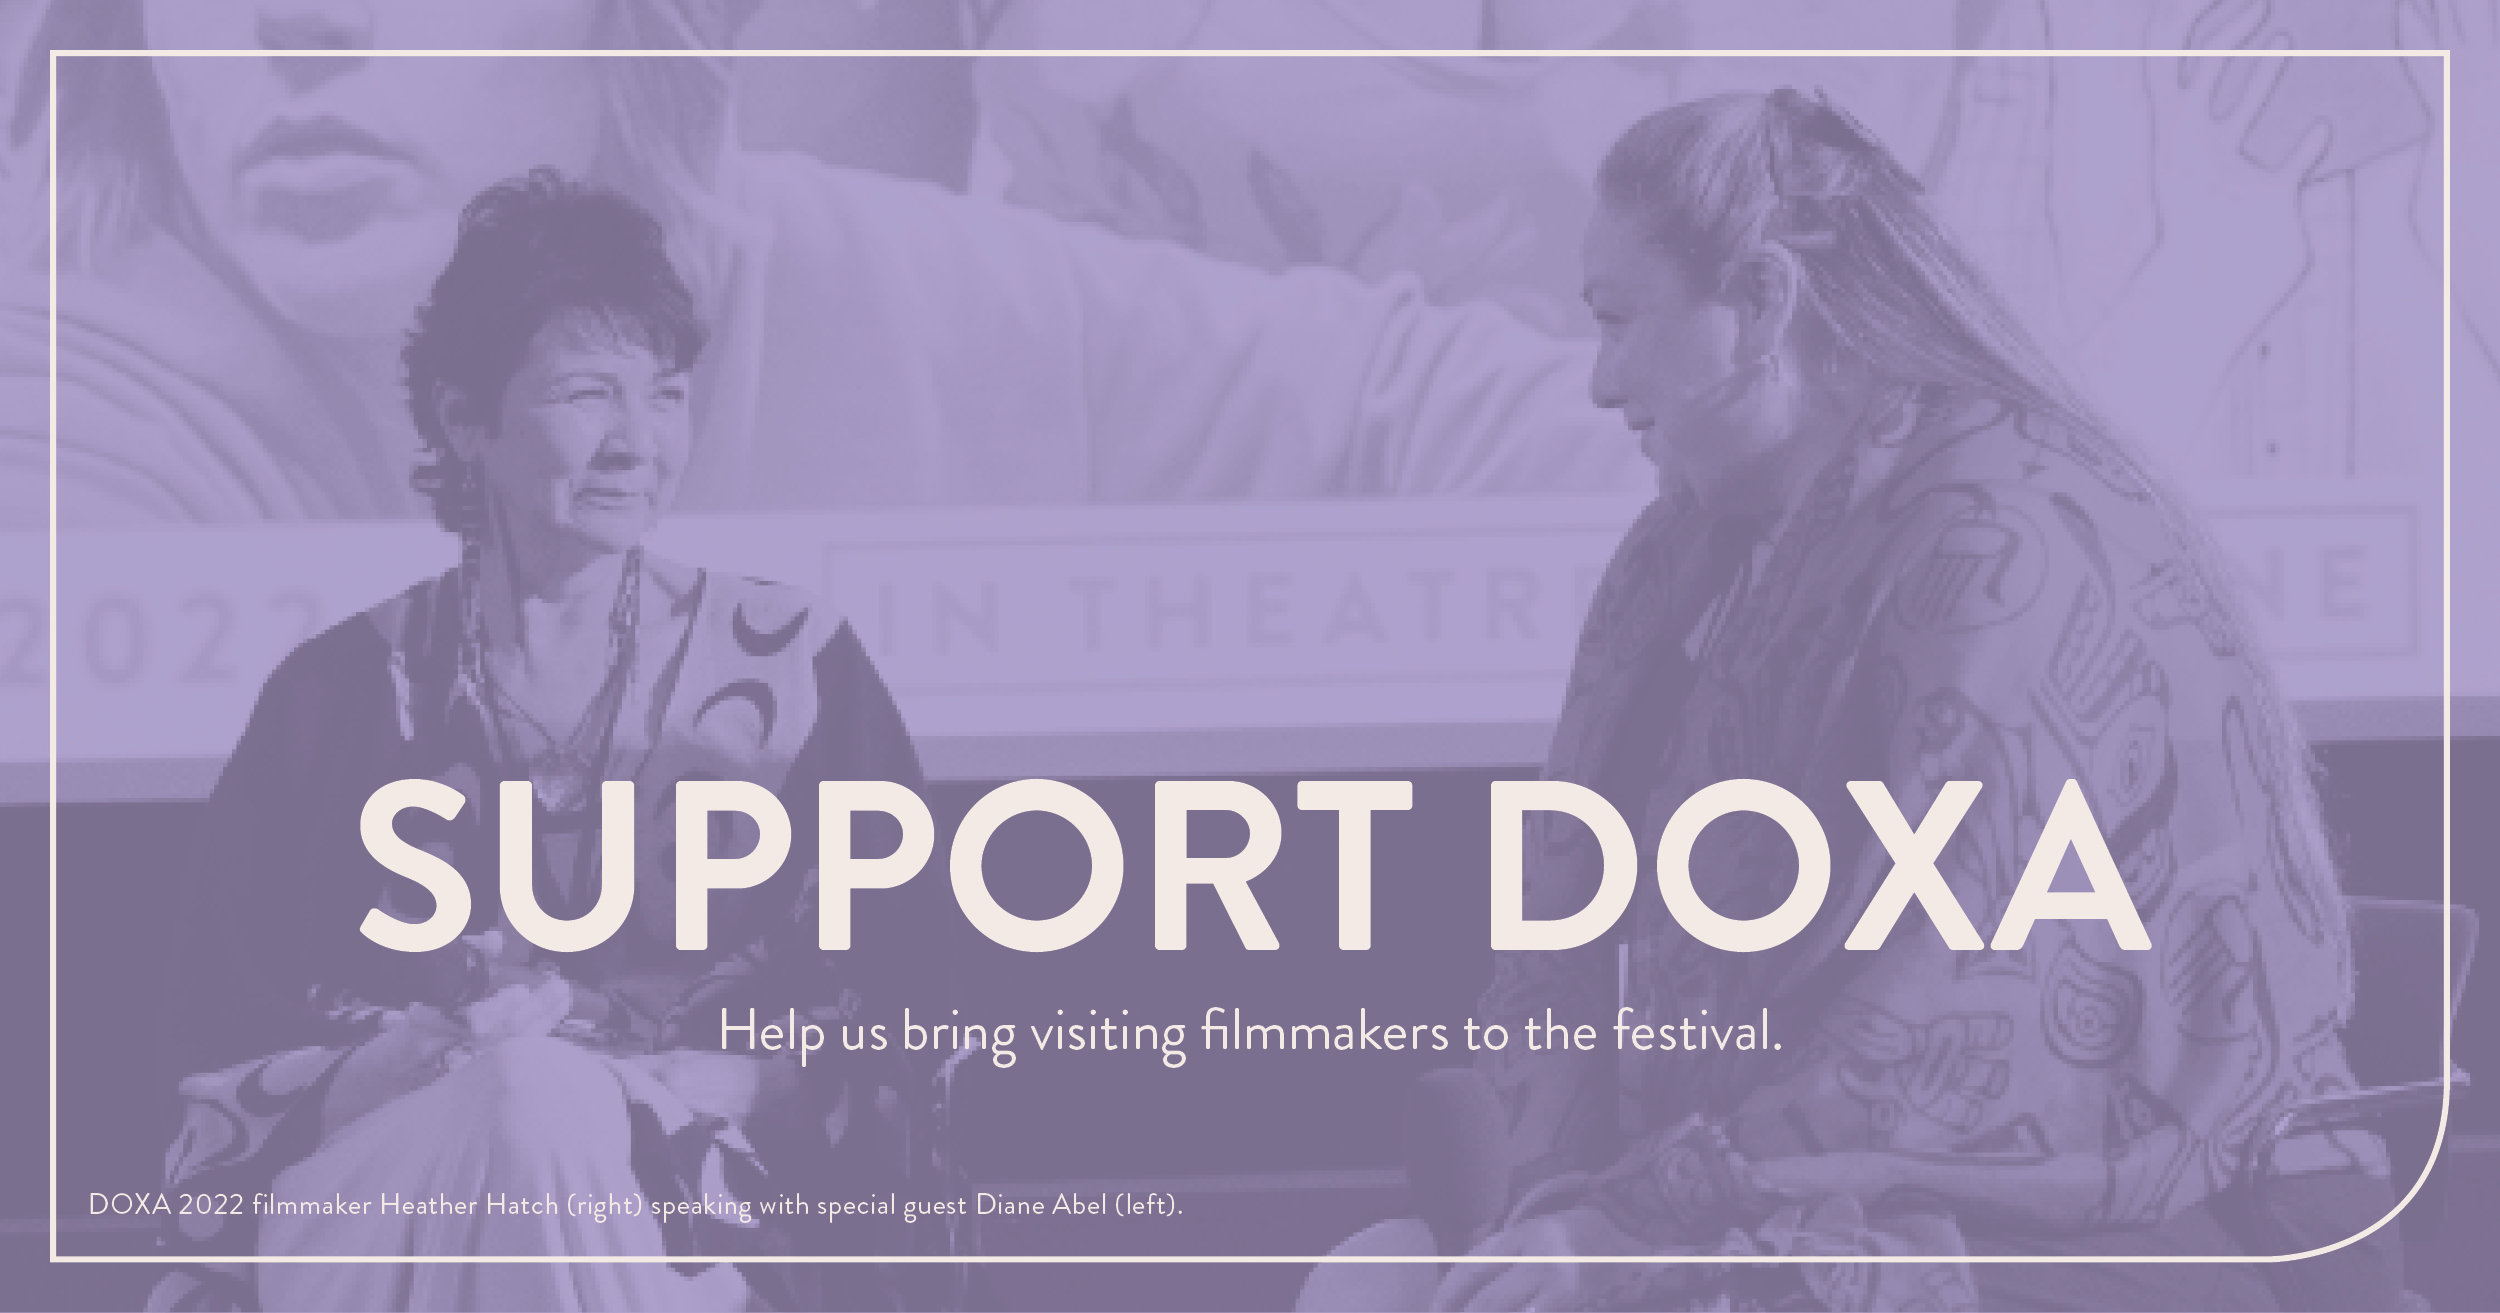 White text over a purple-hued image of two Indigenous women looking at each other and smiling. Text reads: Support DOXA Help us bring visiting filmmakers to the festival.